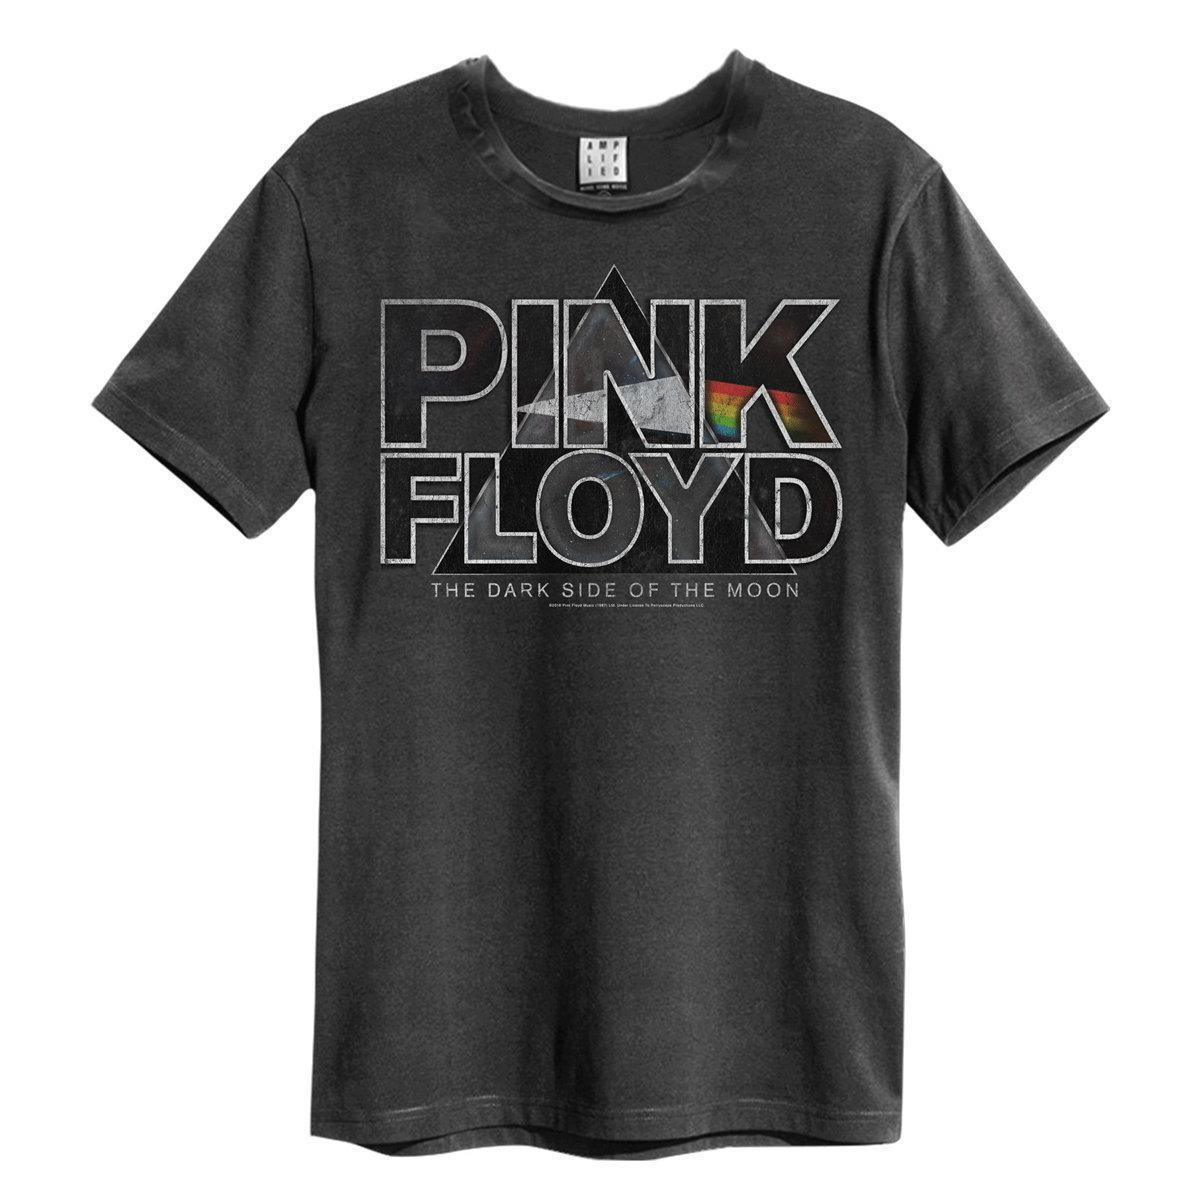 Amplified Unisex Adult Space Pyramid Pink Floyd T-Shirt (Charcoal) (L)